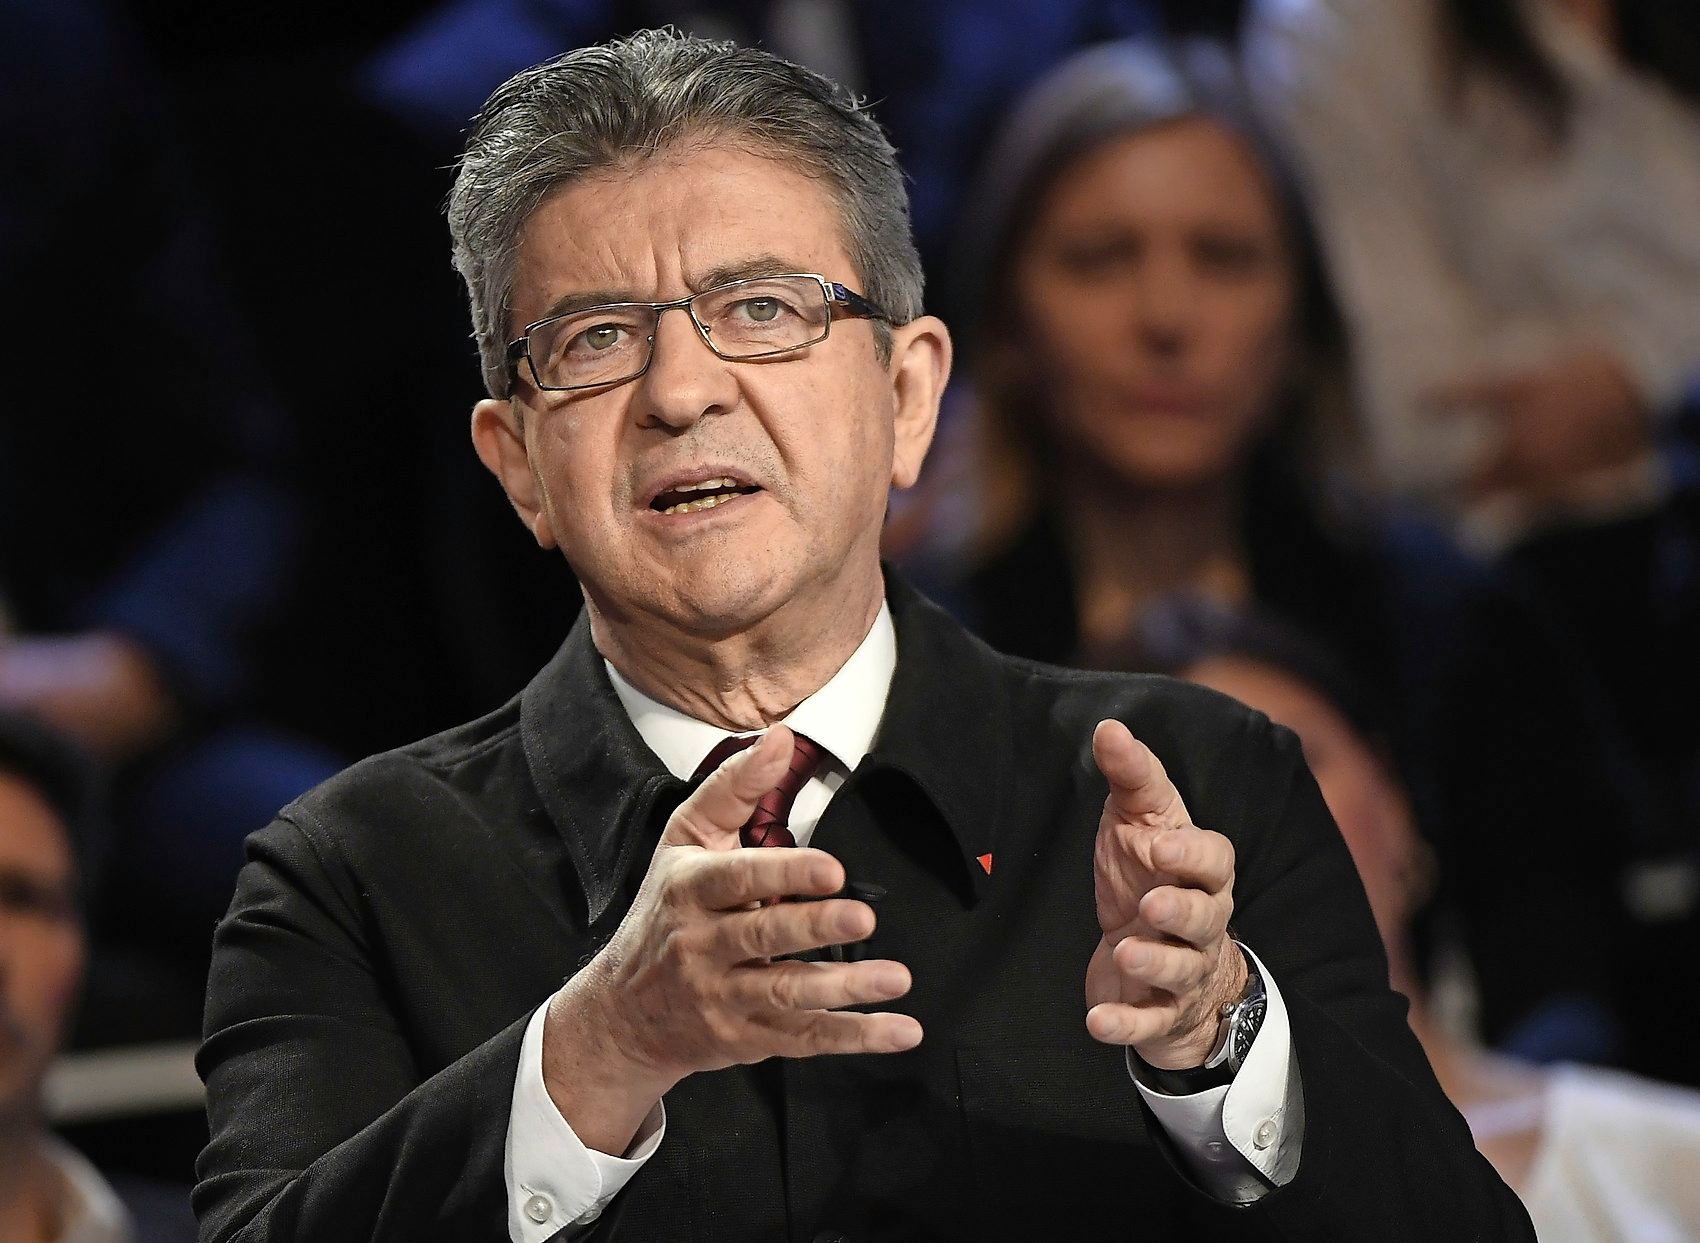 Far-left presidential candidate for the presidential election Jean-Luc Melenchon attends a television debate at French private TV channels BFM TV and CNews, in La Plaine-Saint-Denis, outside Paris, France, Tuesday, April 4, 2017. The 11 candidates in France's presidential race are preparing to face off in a crucial debate Tuesday evening, less than three weeks before the first round of the election. (Lionel Bonaventure/Pool Photo via AP) France Election